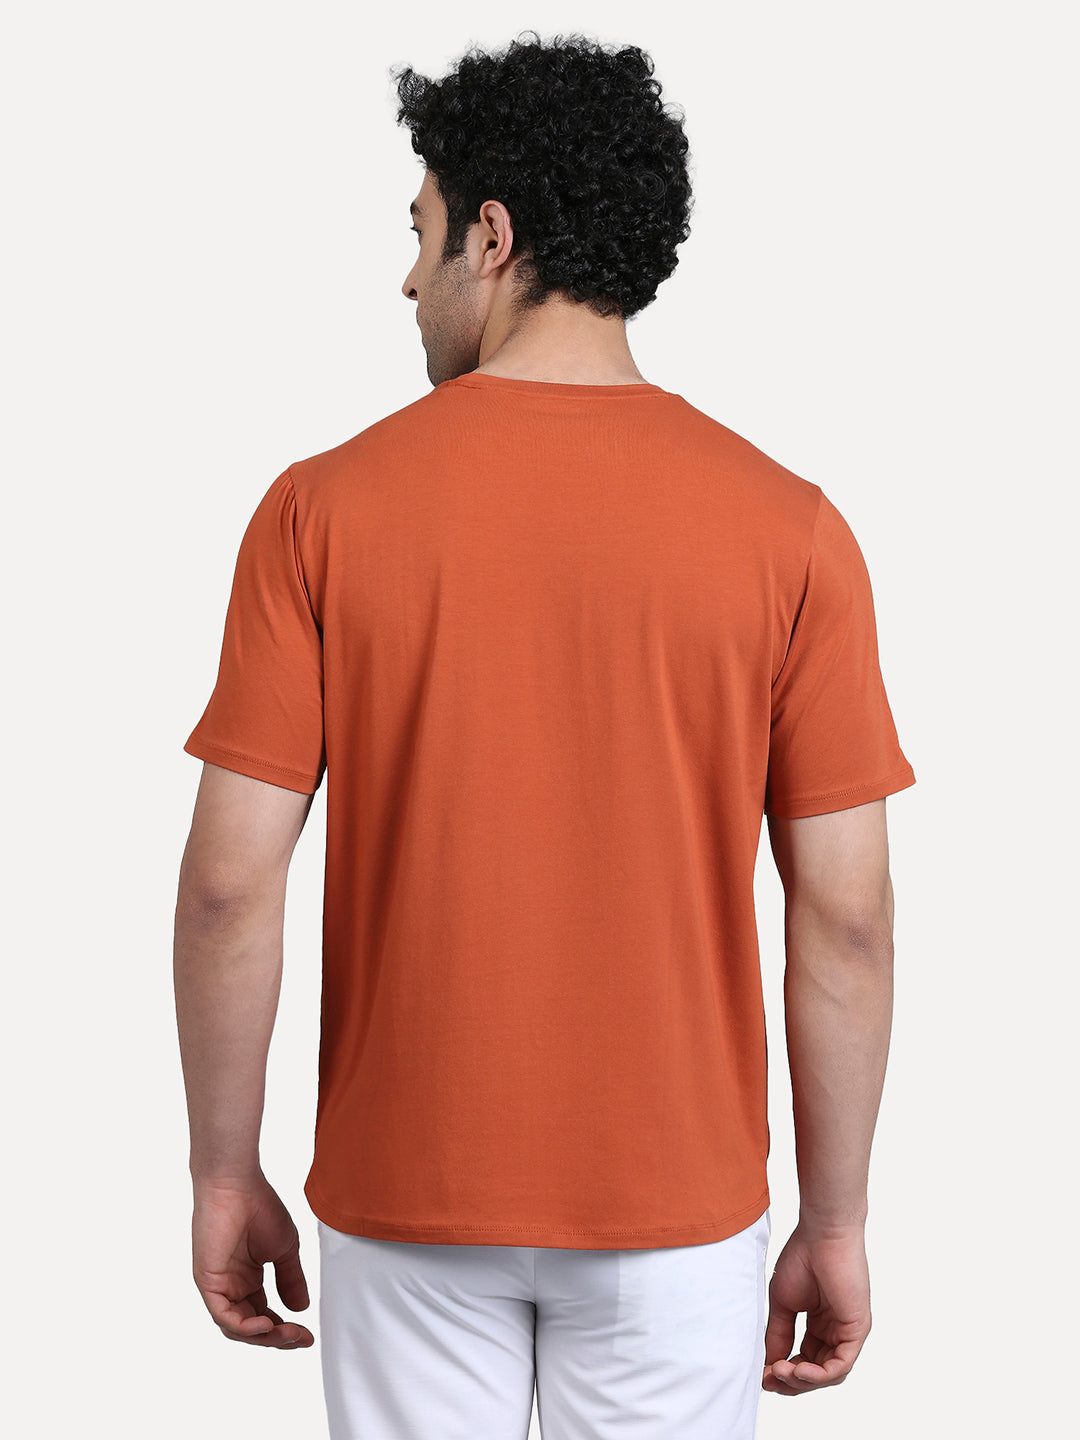 Baked Clay Round Neck Tee